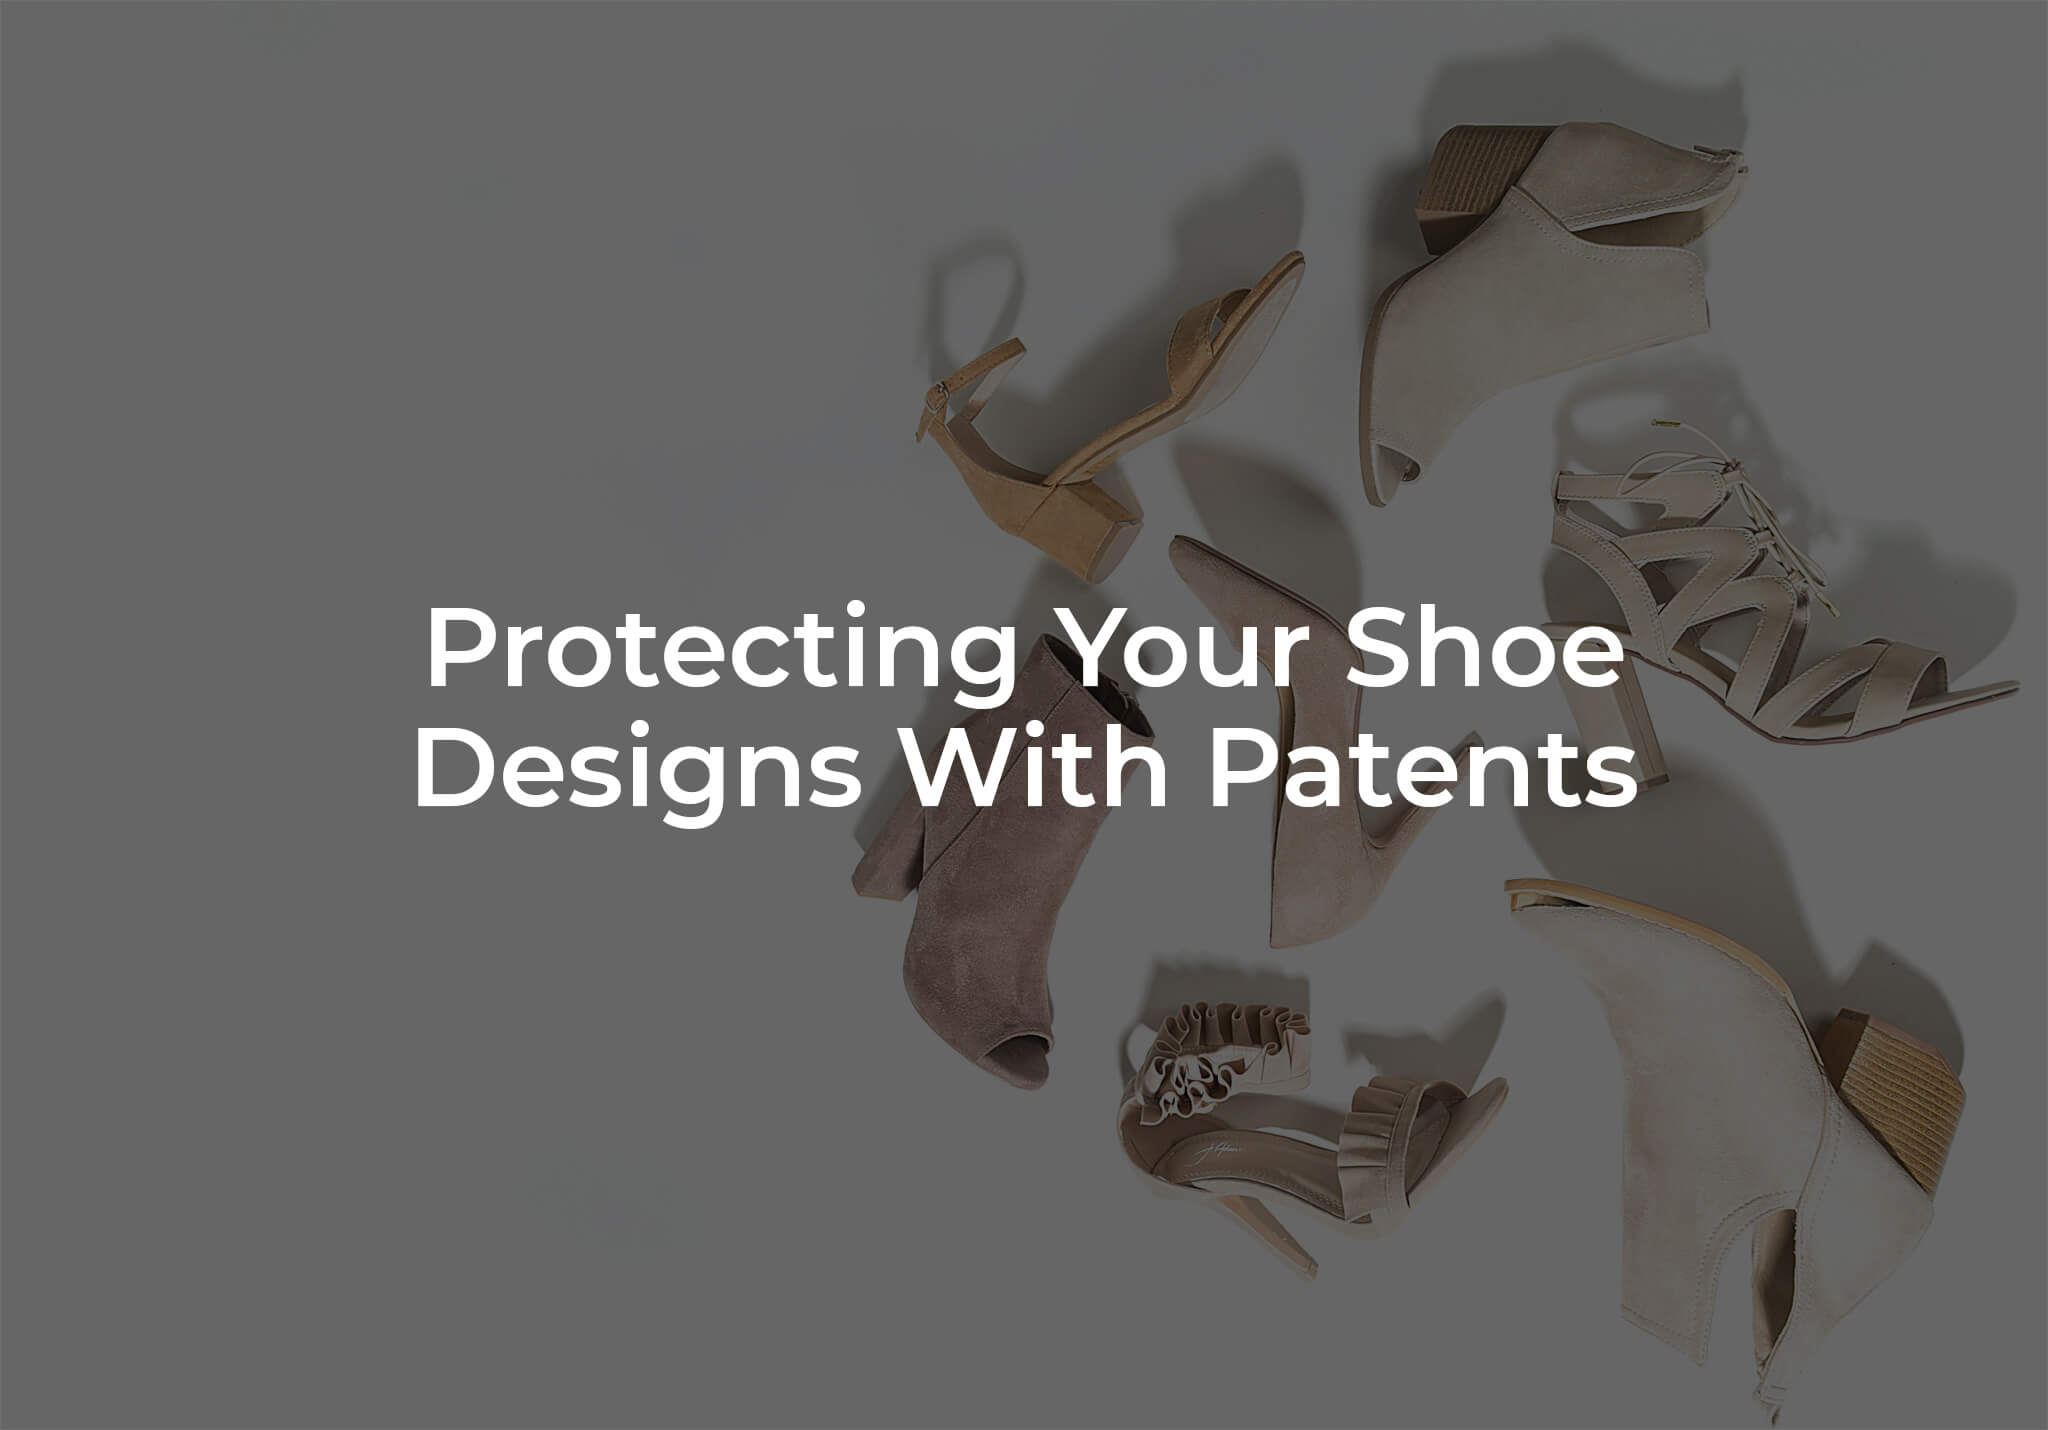 Protecting Your Shoe Designs With Patents